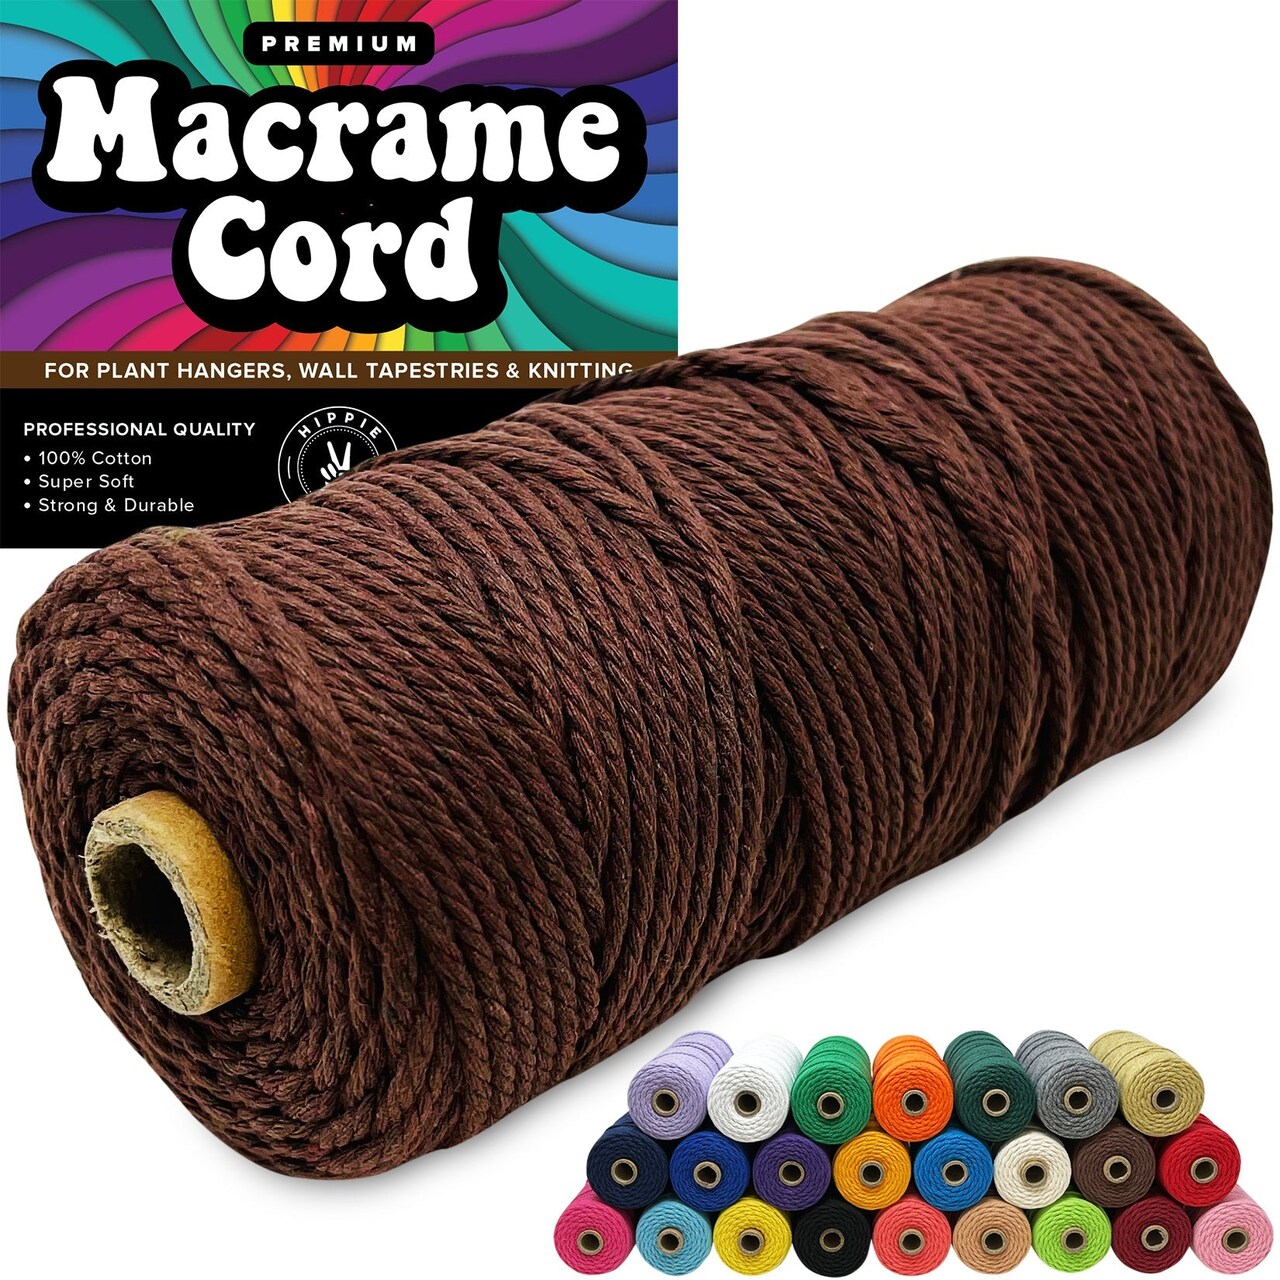 3mm Macrame Cord 3mm Thick Cords for Macrame Yarn 100% Cotton Colored  Macrame Rope Cord Natural Craft Cord String Yarn Supplies 325 Feet 3 mm  Cotton Macrame Cord Thin Macrame Supplies